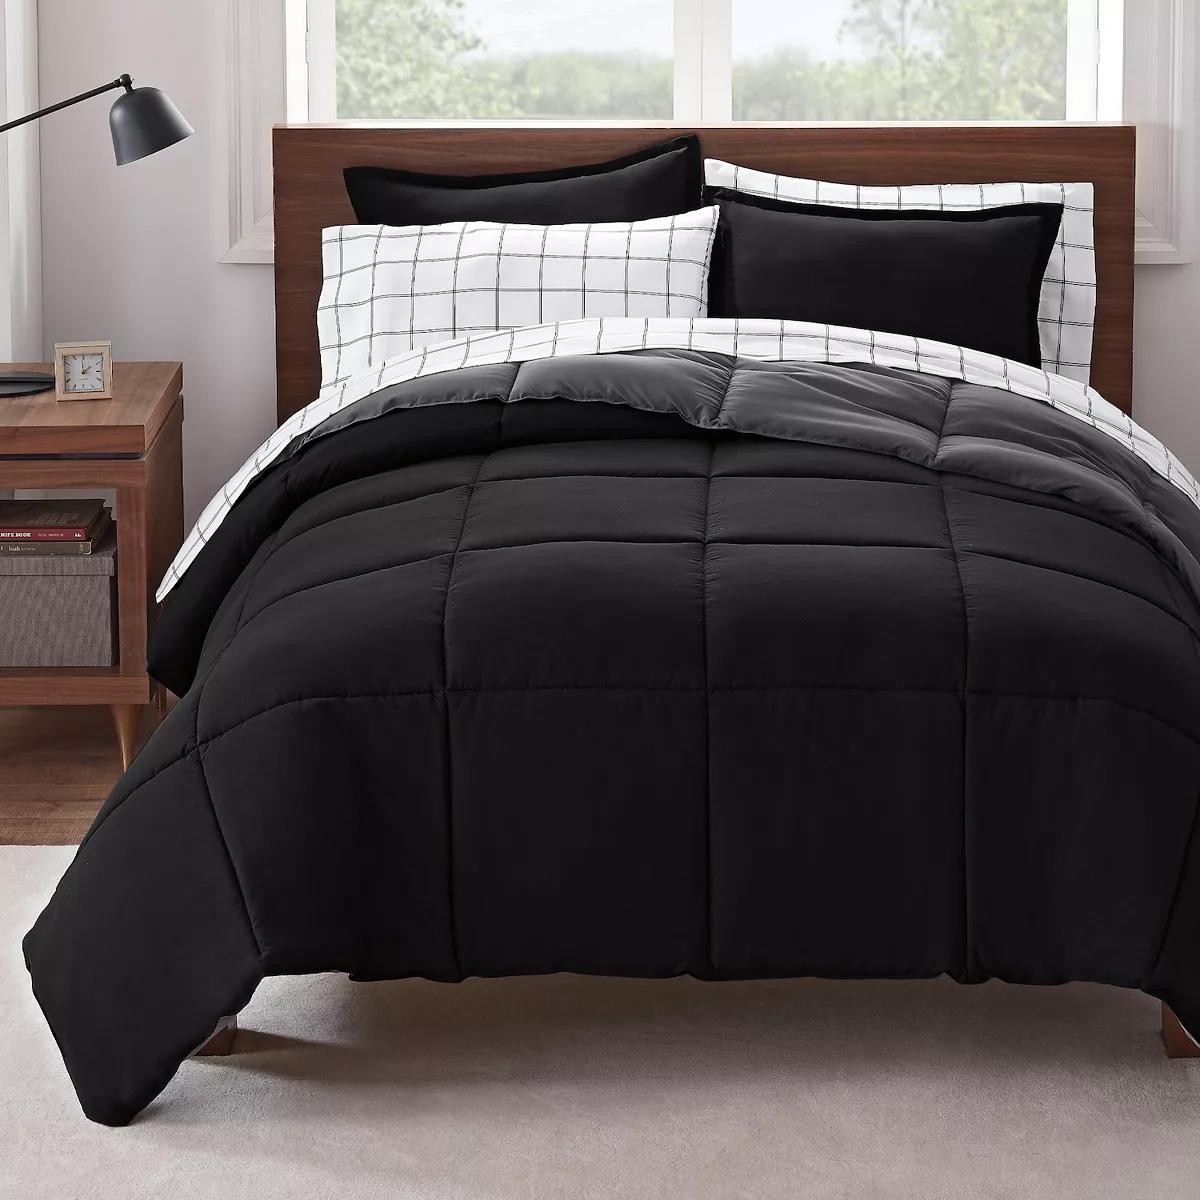 Serta Simply Clean Antimicrobial Reversible Comforter Set for $27.99